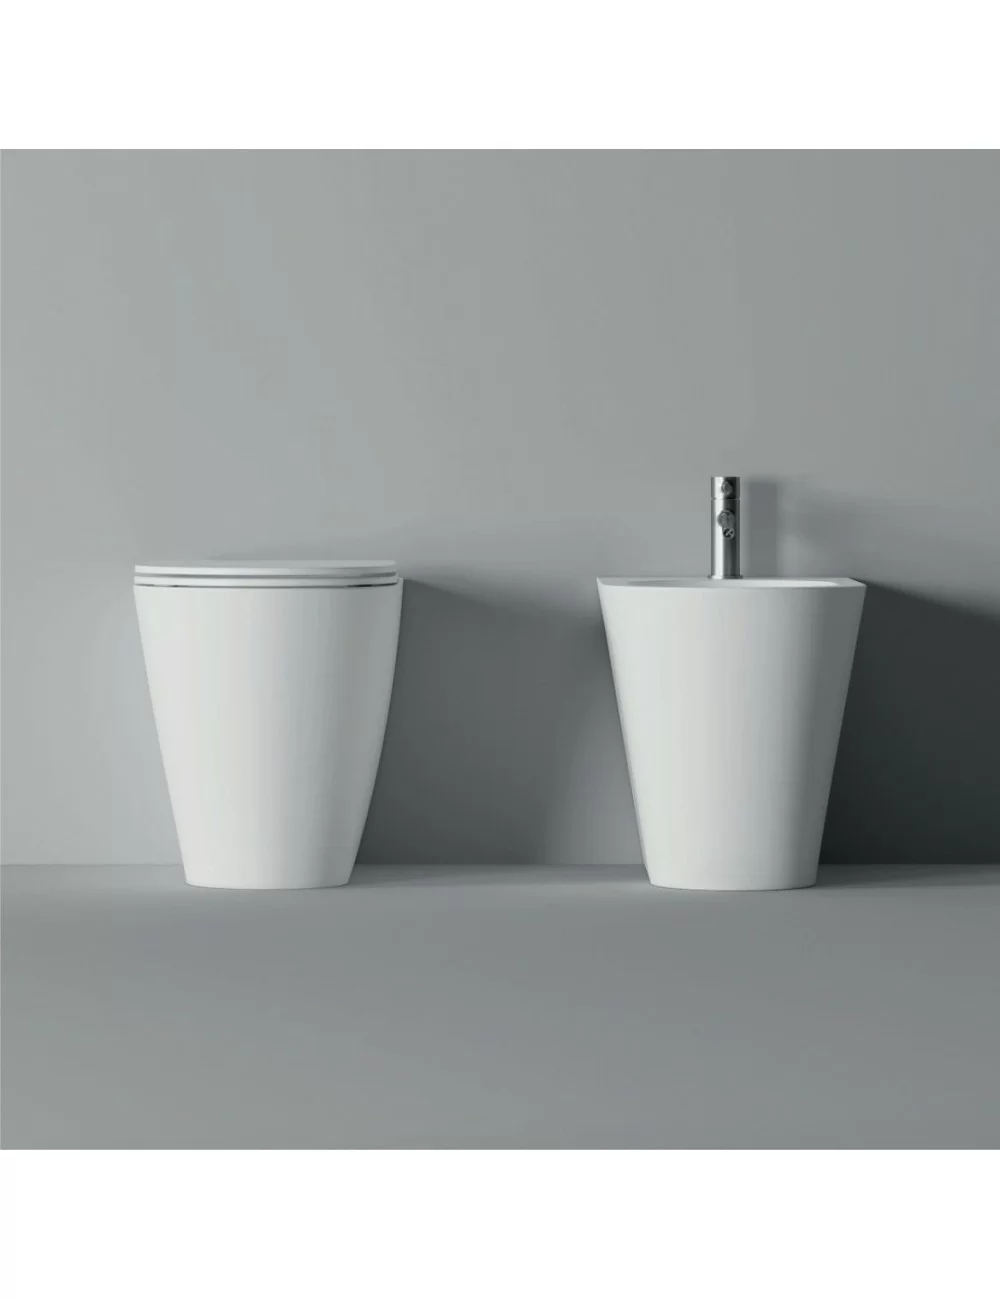 white squared floor-standing bathroom fittings Hide by Alice ceramica